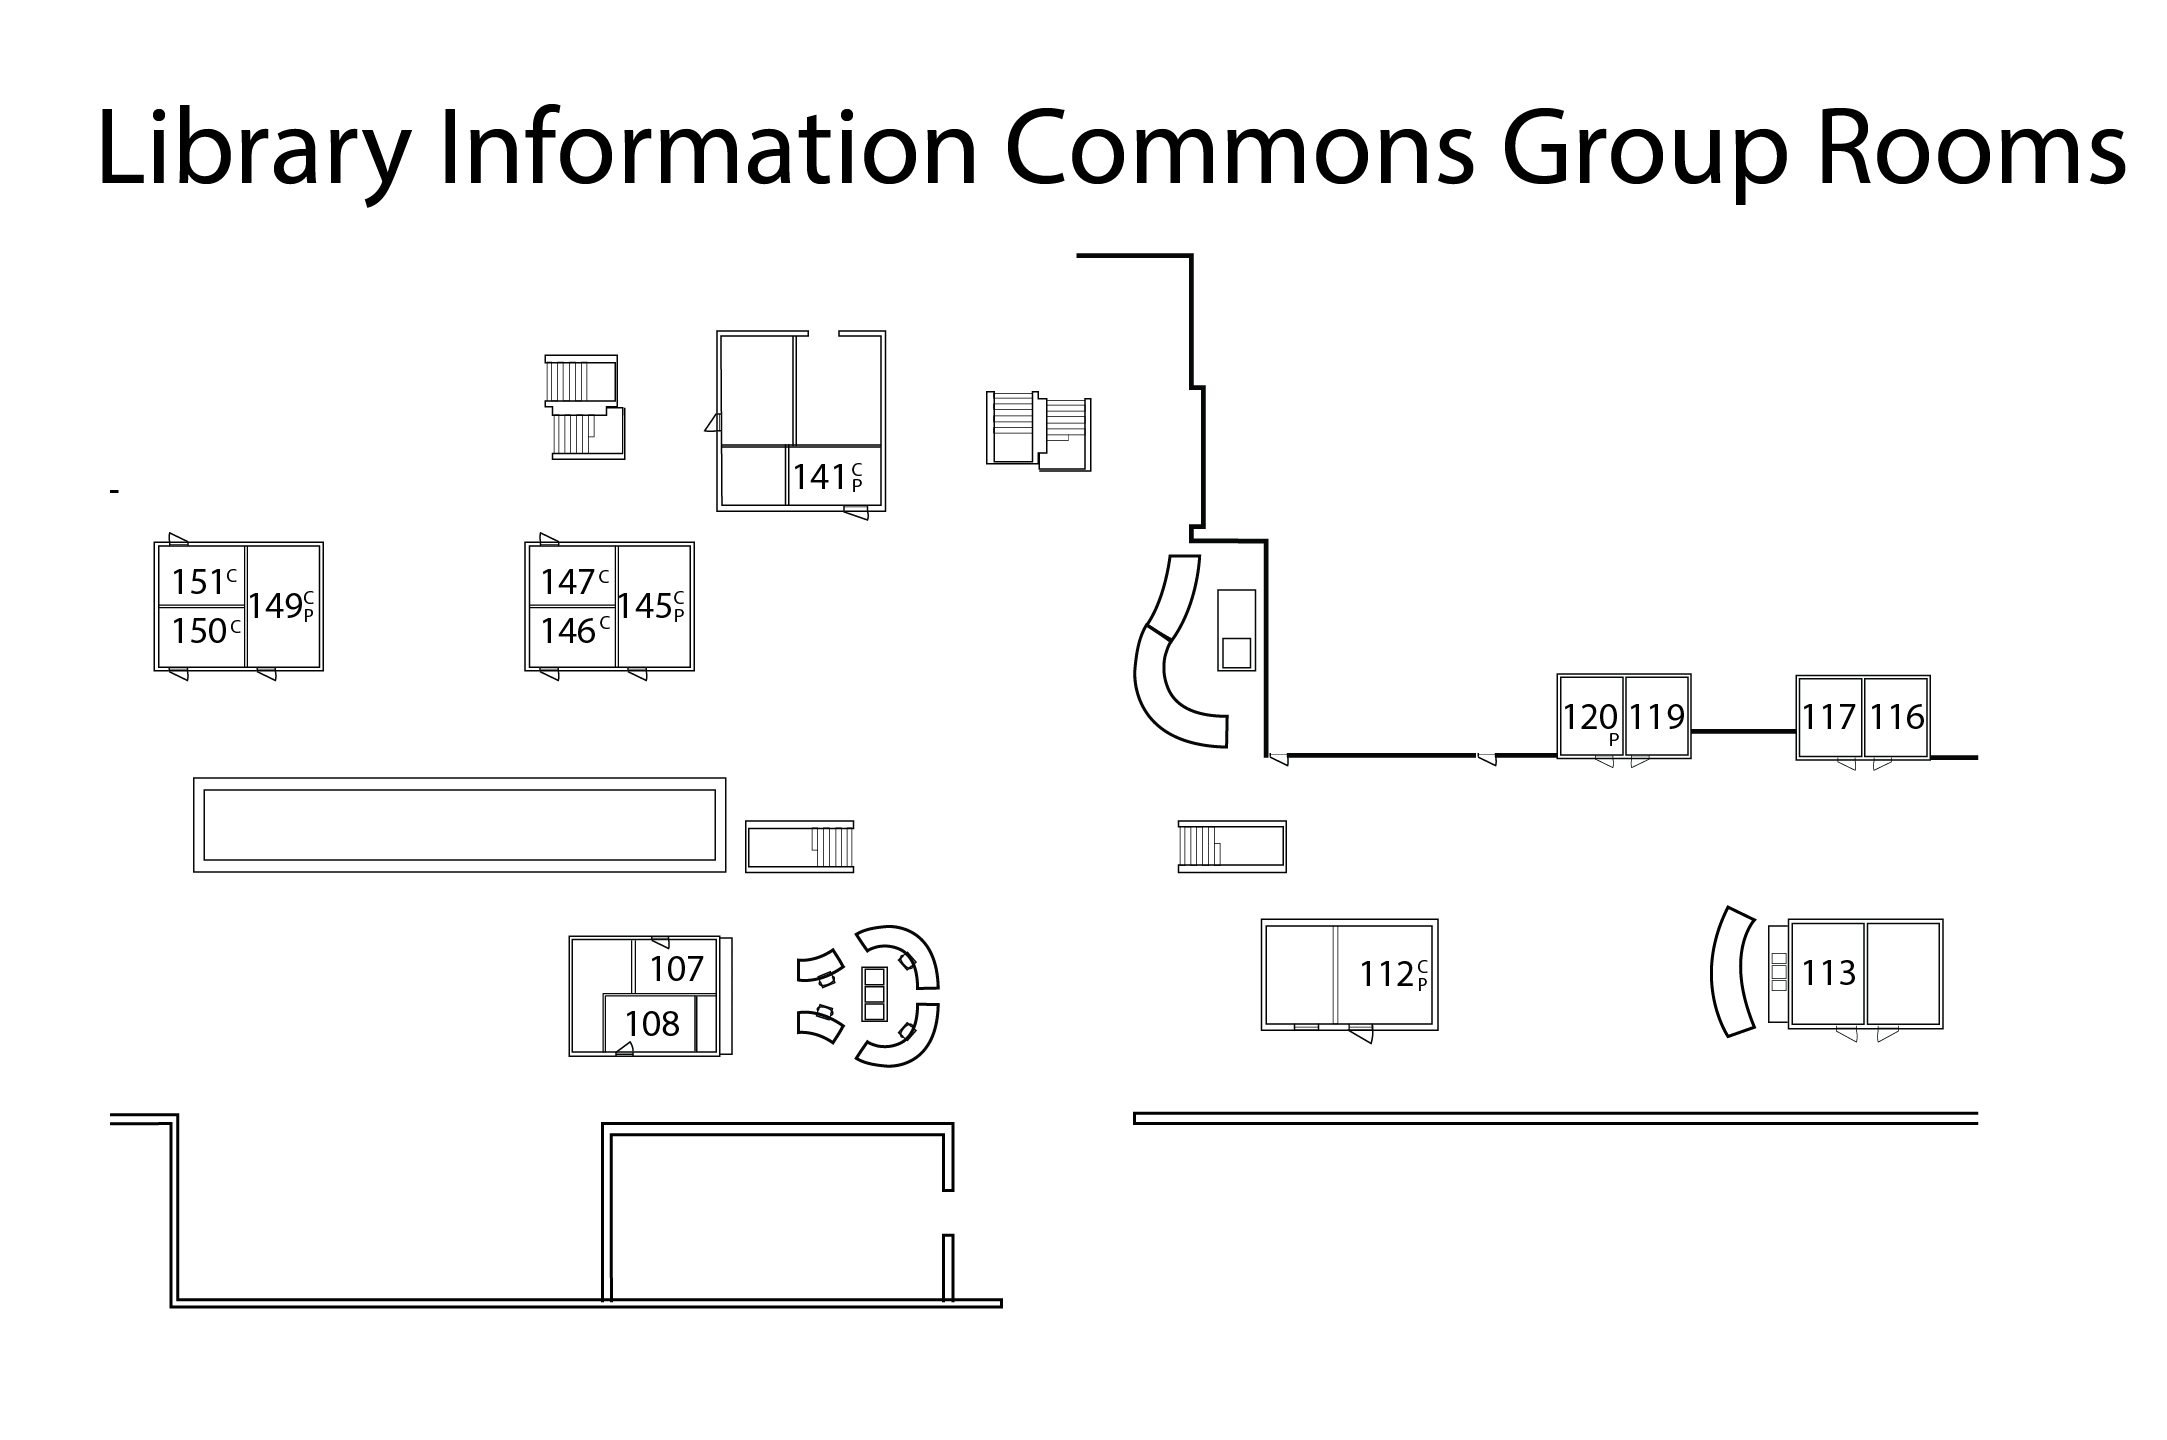 Information Commons group room map